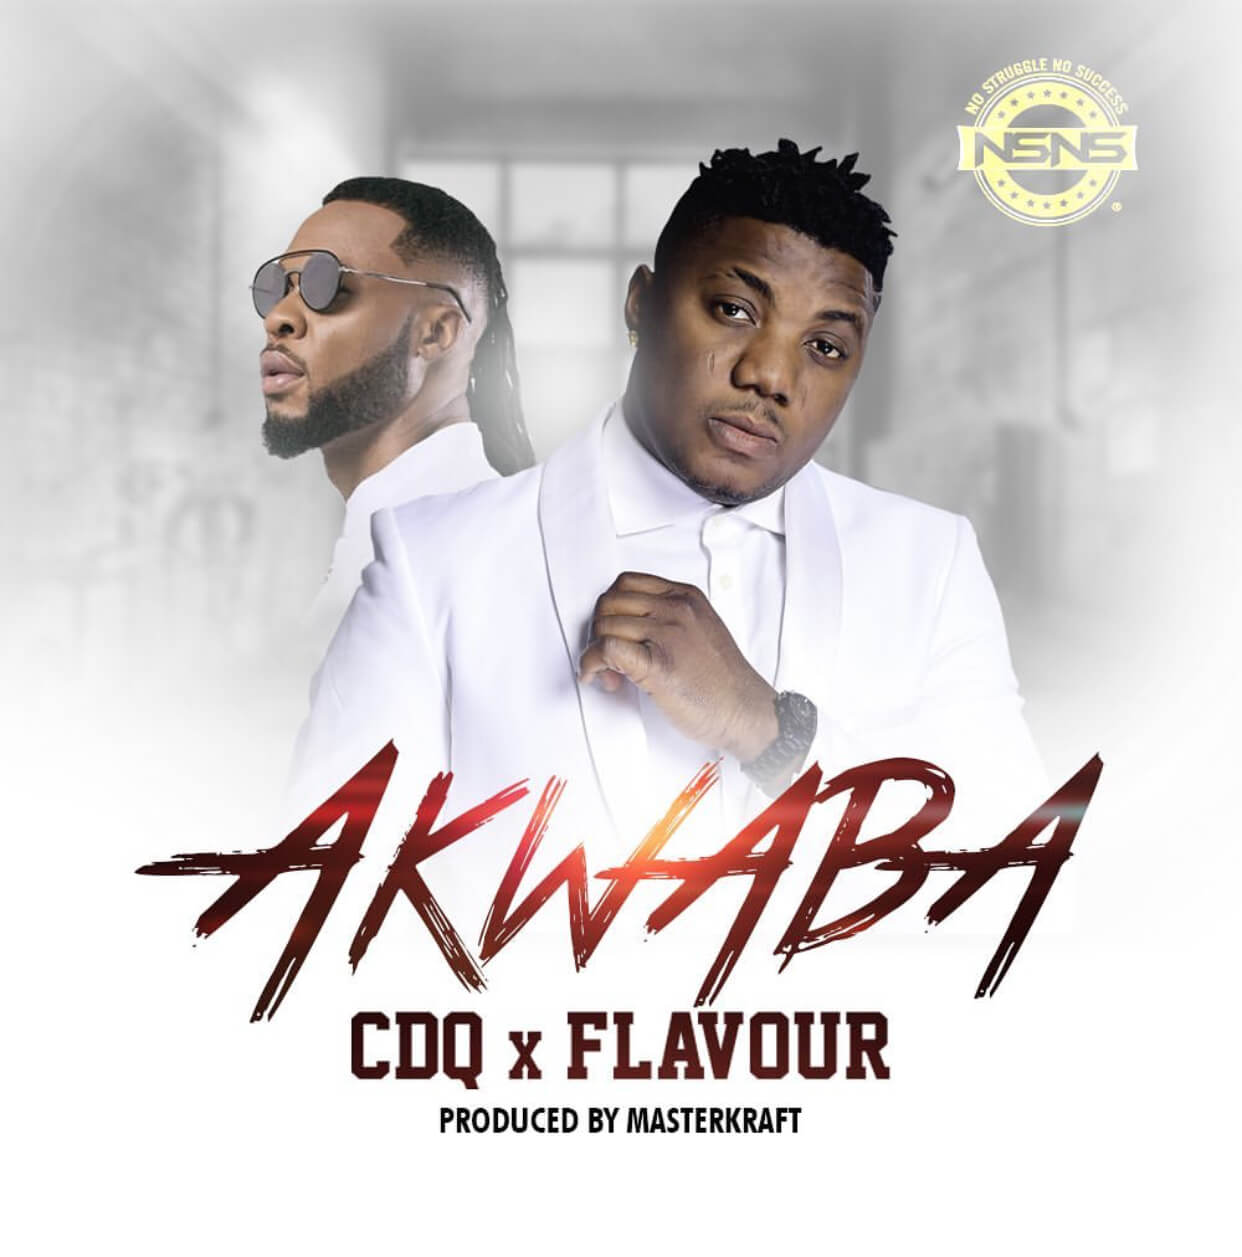 CDQ ft. Flavour – "Akwaba"